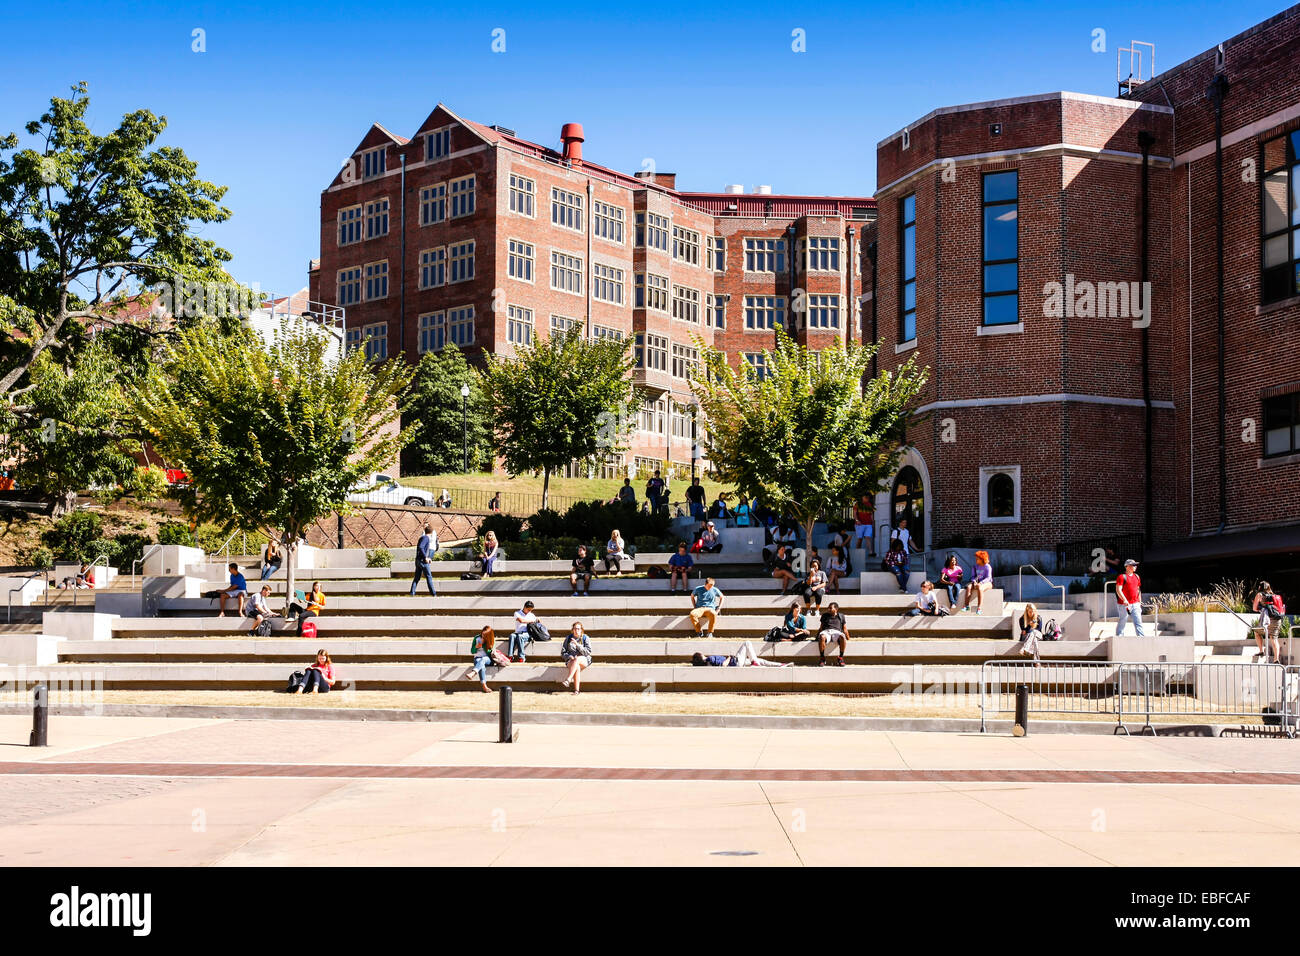 The old campus buildings on the hill at the University of Tennessee Stock Photo